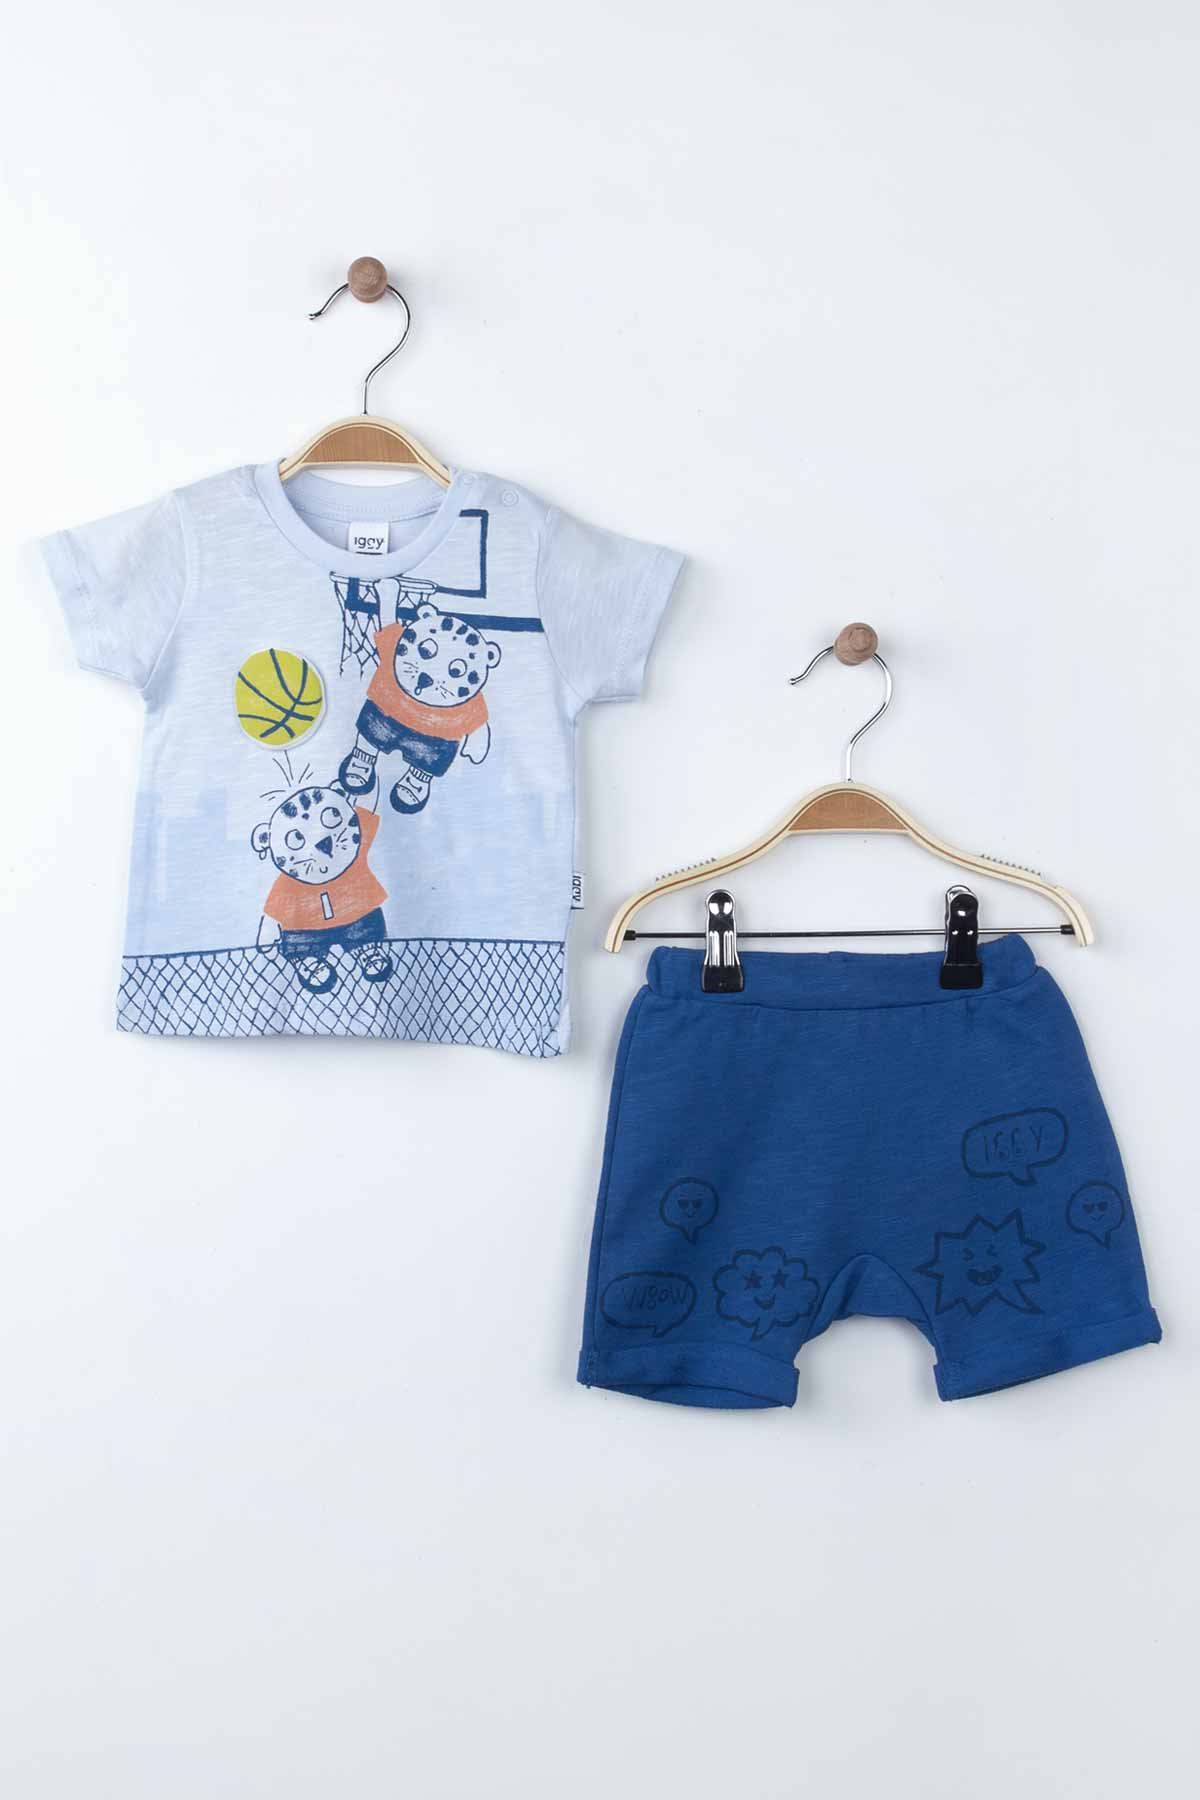 Blue Baby Boy Summer Suit Outfit Bottom Child Clothes Tops Male Boys Babies Outfit Holiday Beach Kids wear Suit Clothing model